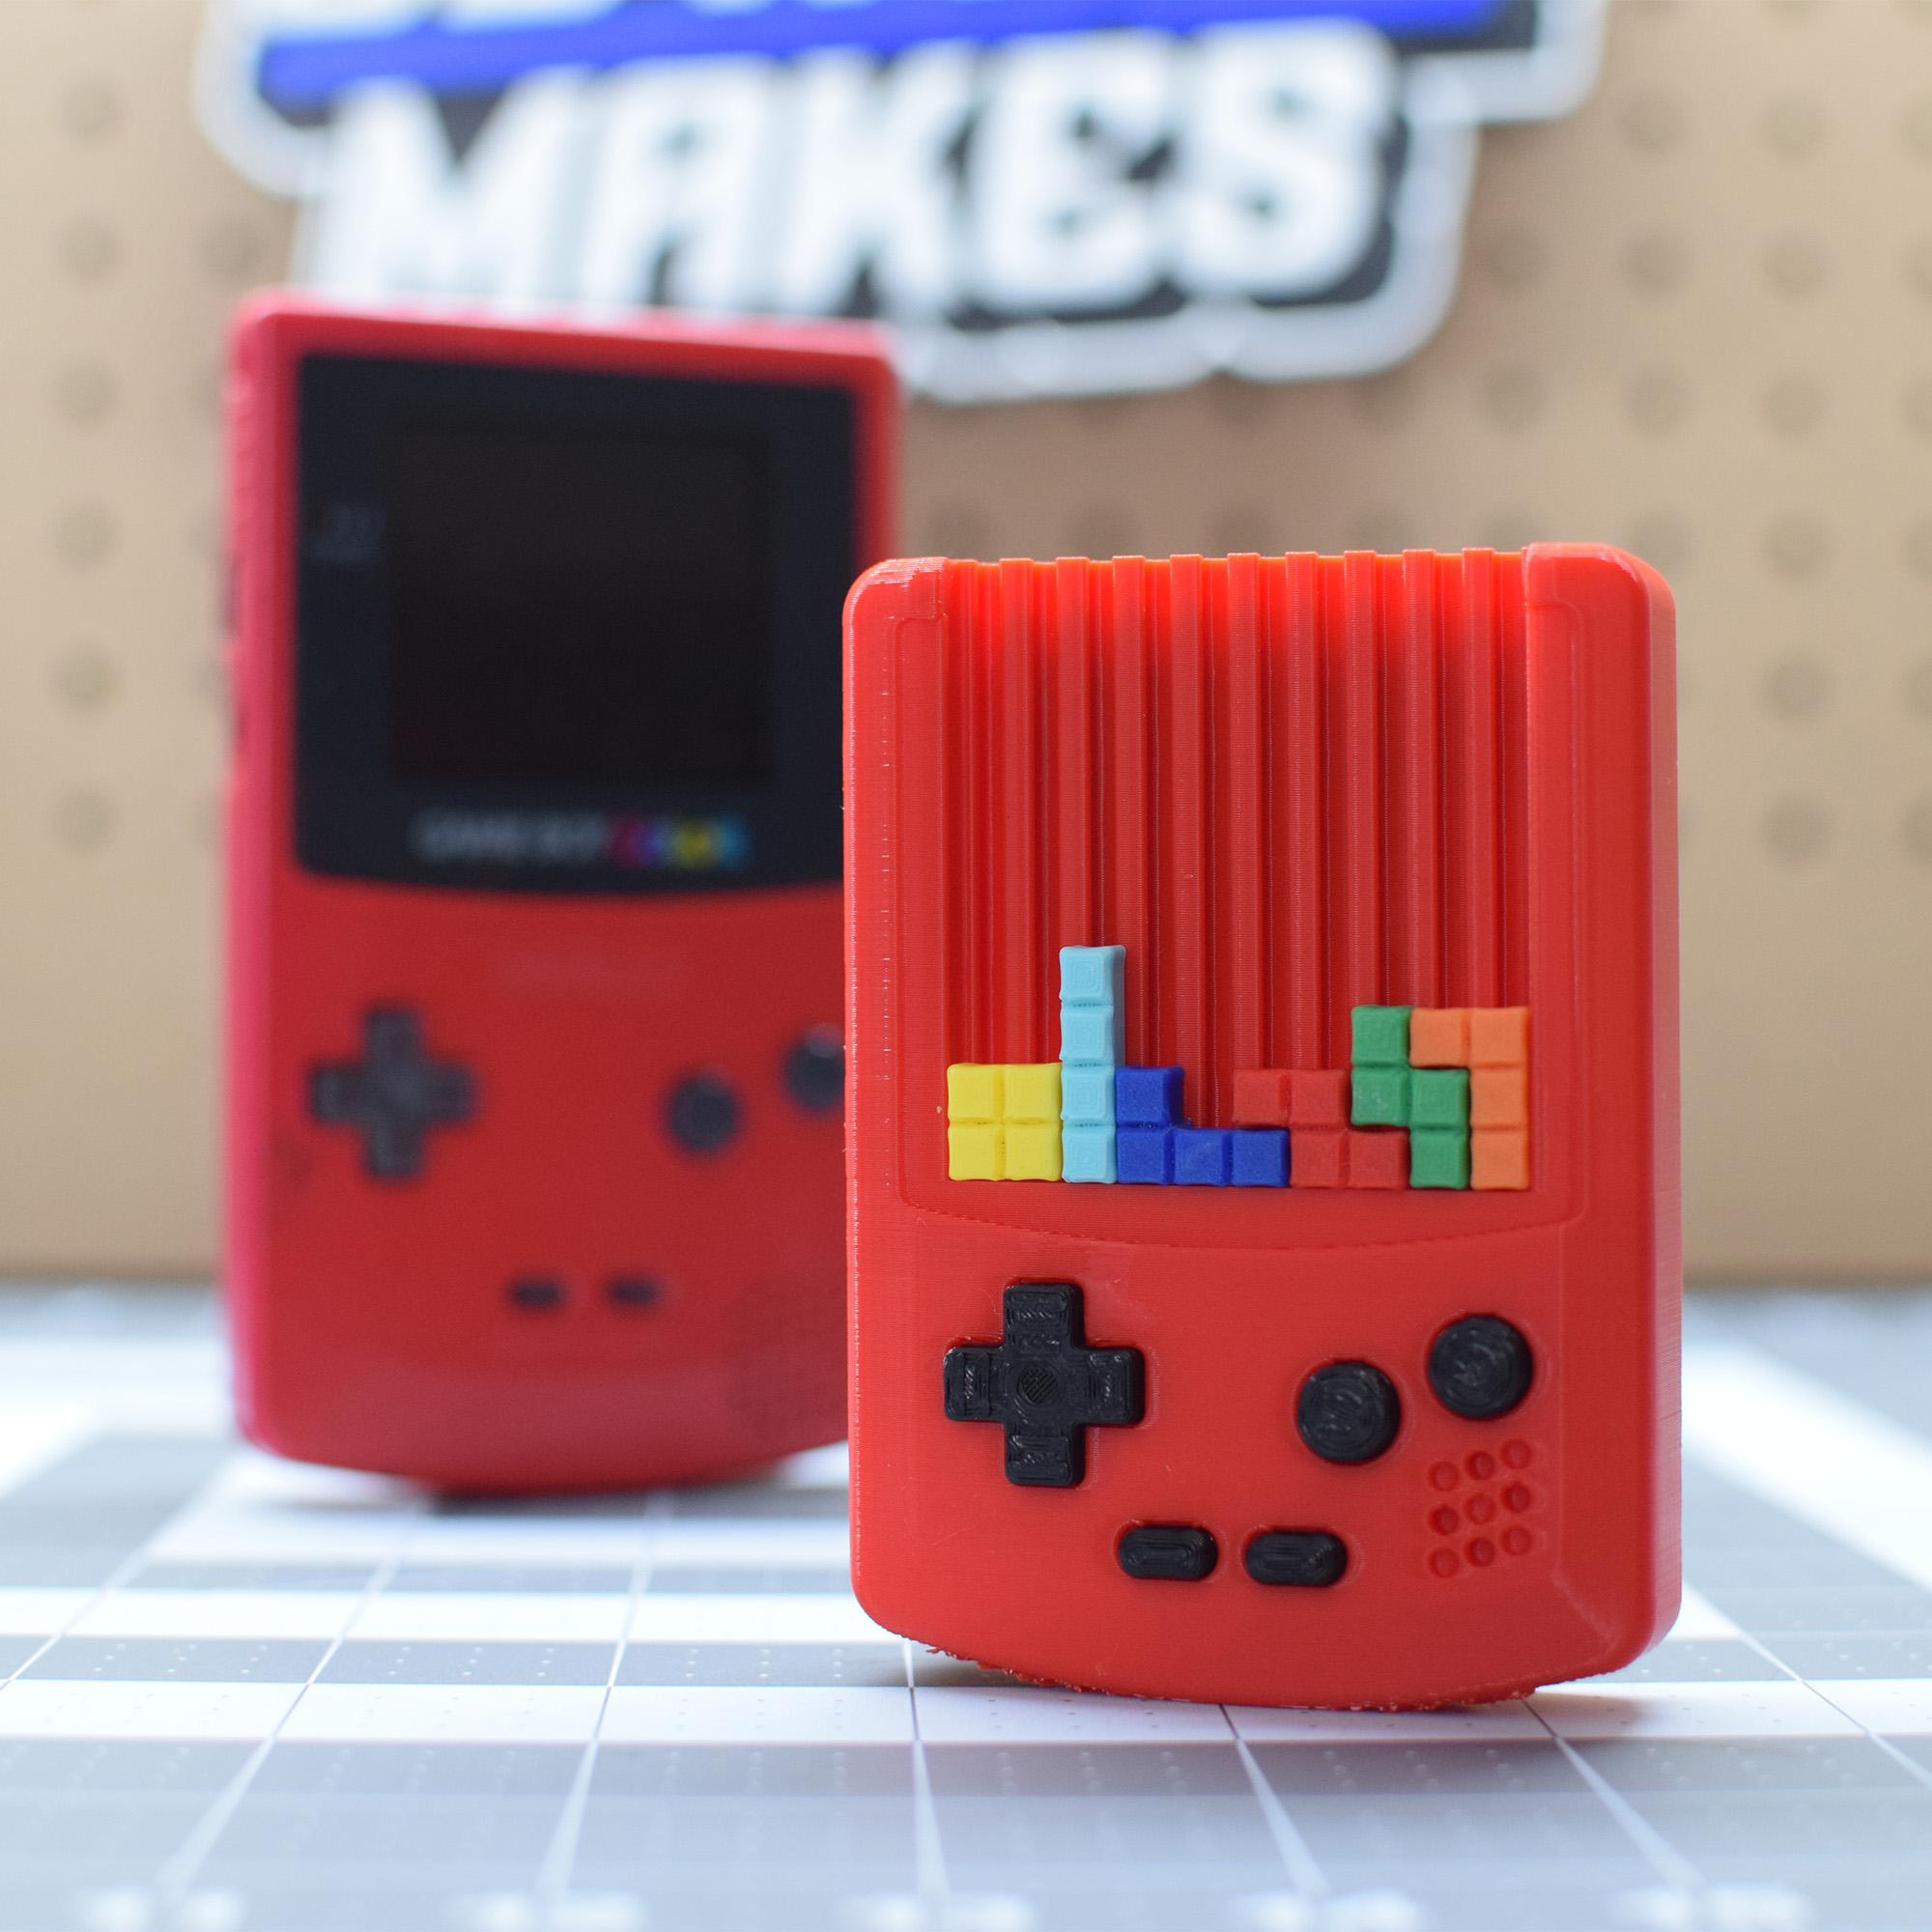 MINI TETRIS GAMEBOY COLOR - RETRO TOY AND CONTAINER 3d model